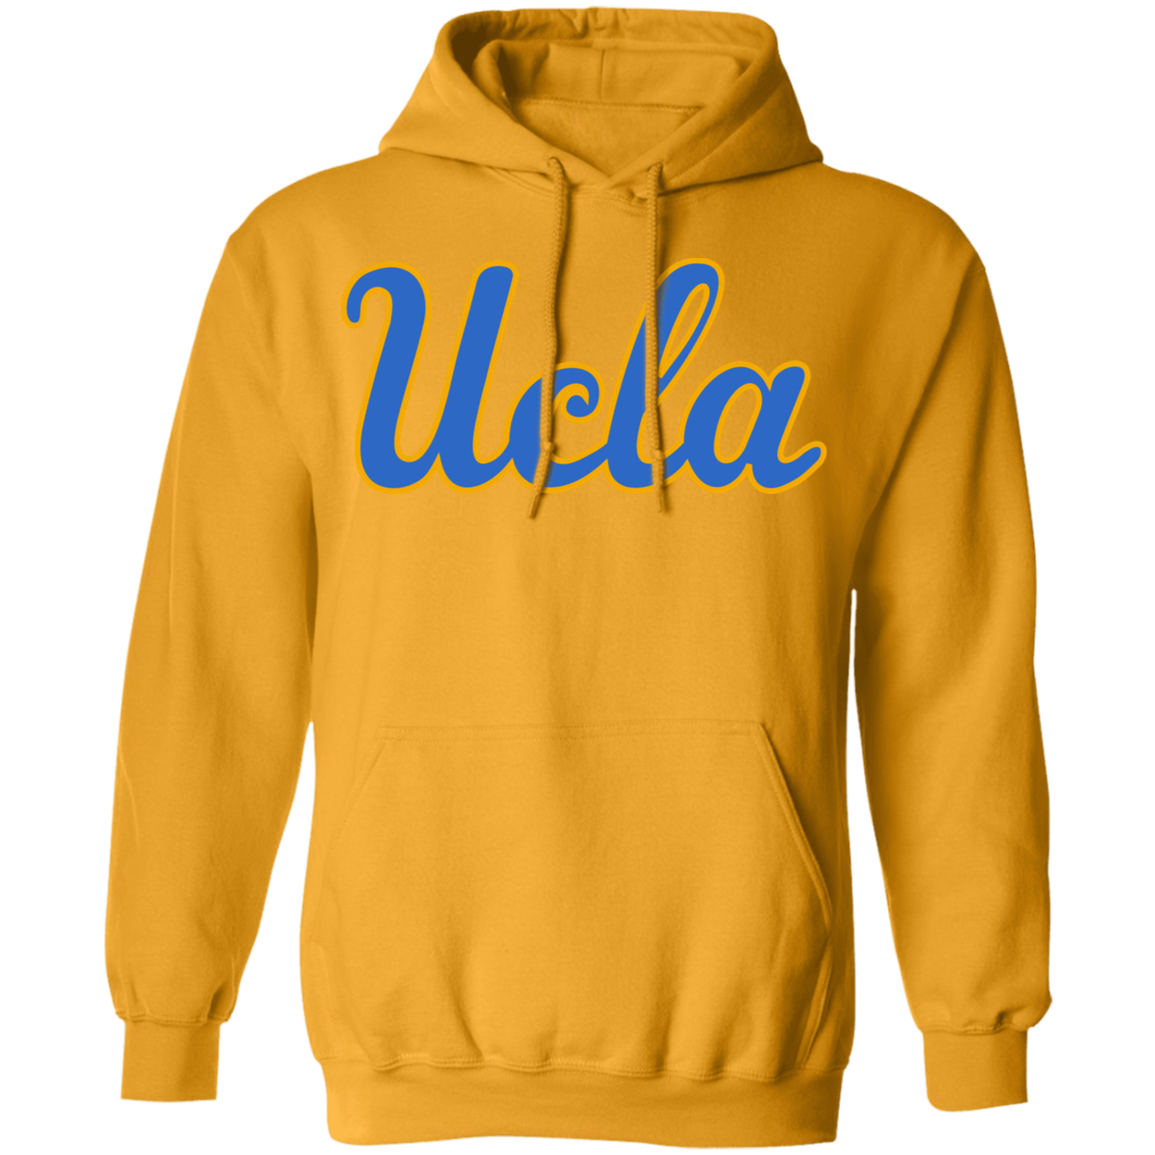 UCLA Bruins Pullover Hoodie - Happy Spring Tee free shipping